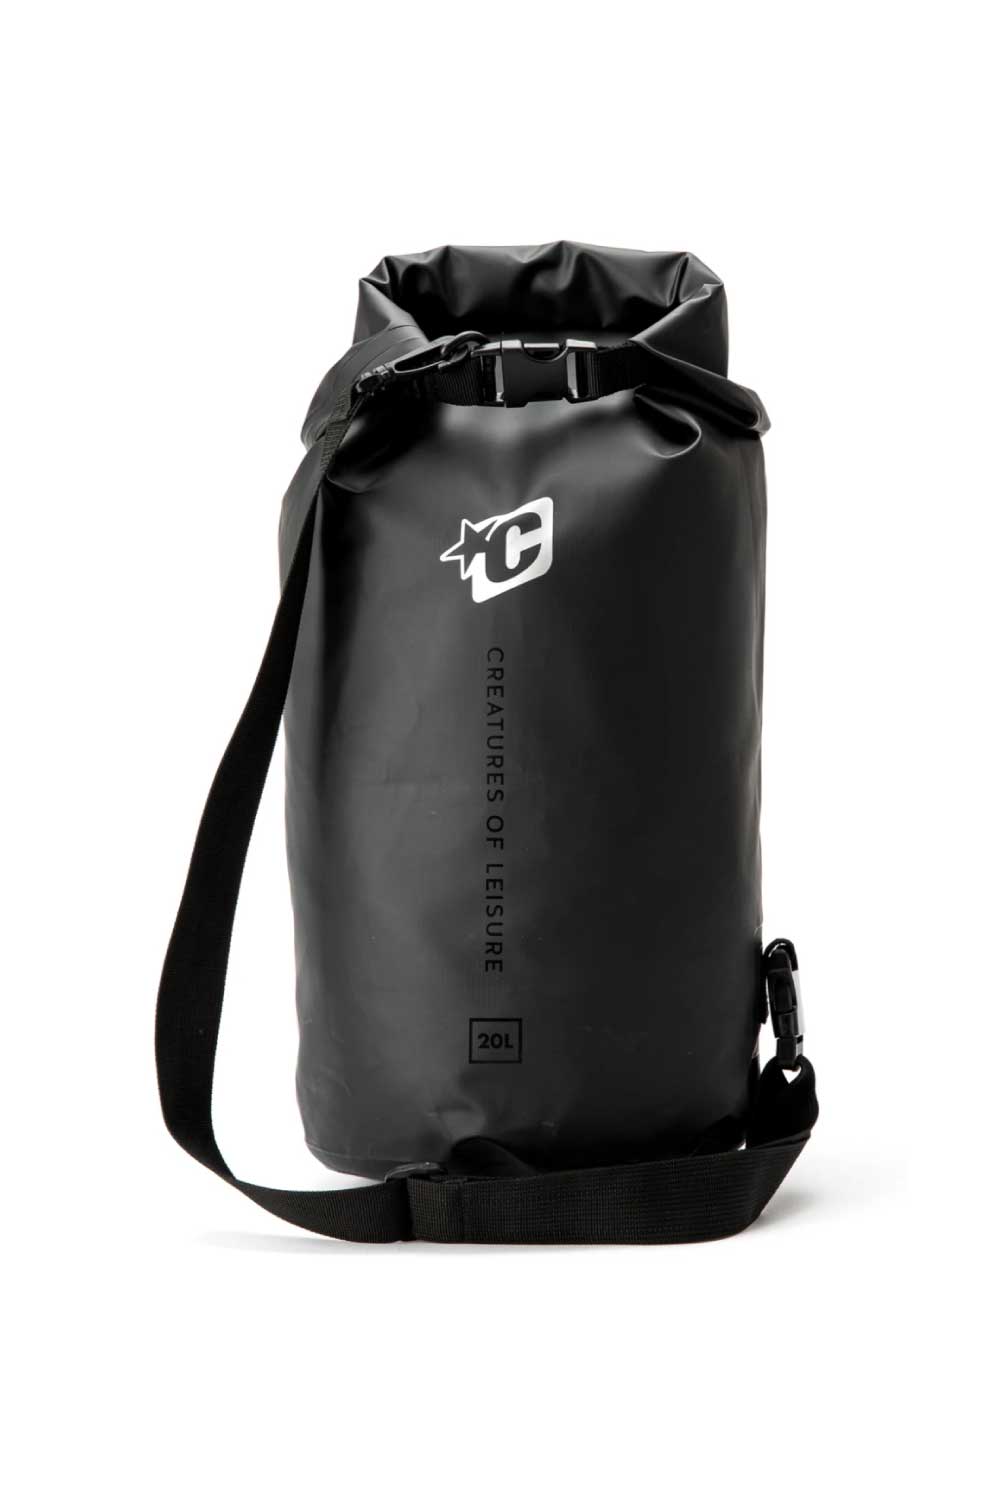 Creatures of Leisure Dry Use Dry Bag 20L